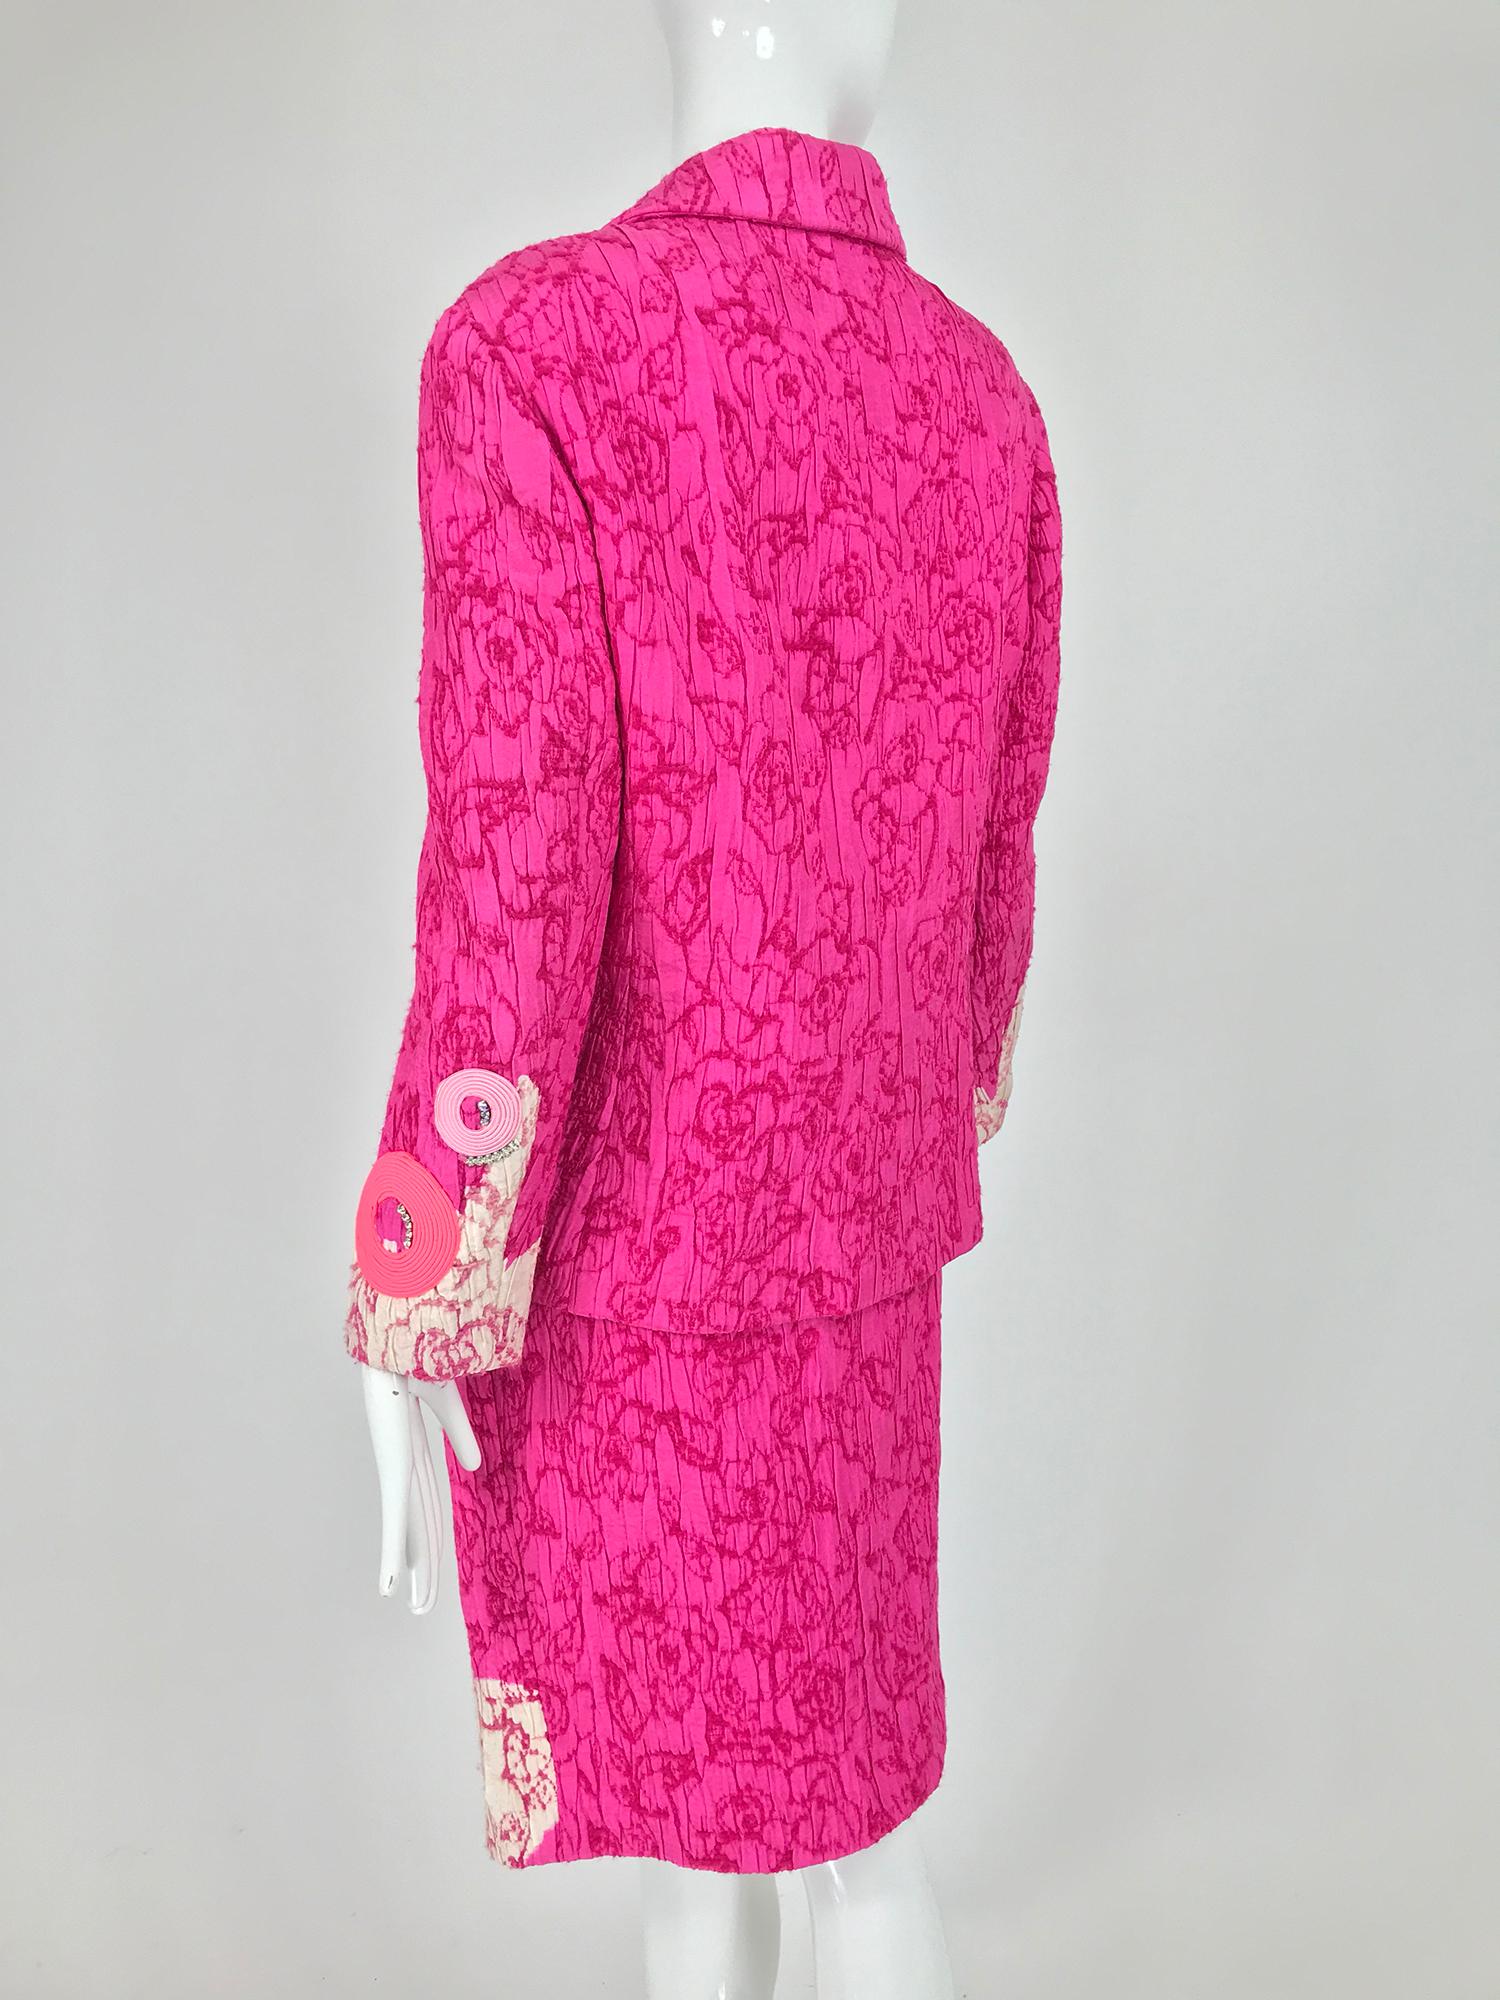 Christian Lacroix Pink Embroidered Silk Applique Skirt Suit 1990s For Sale 6